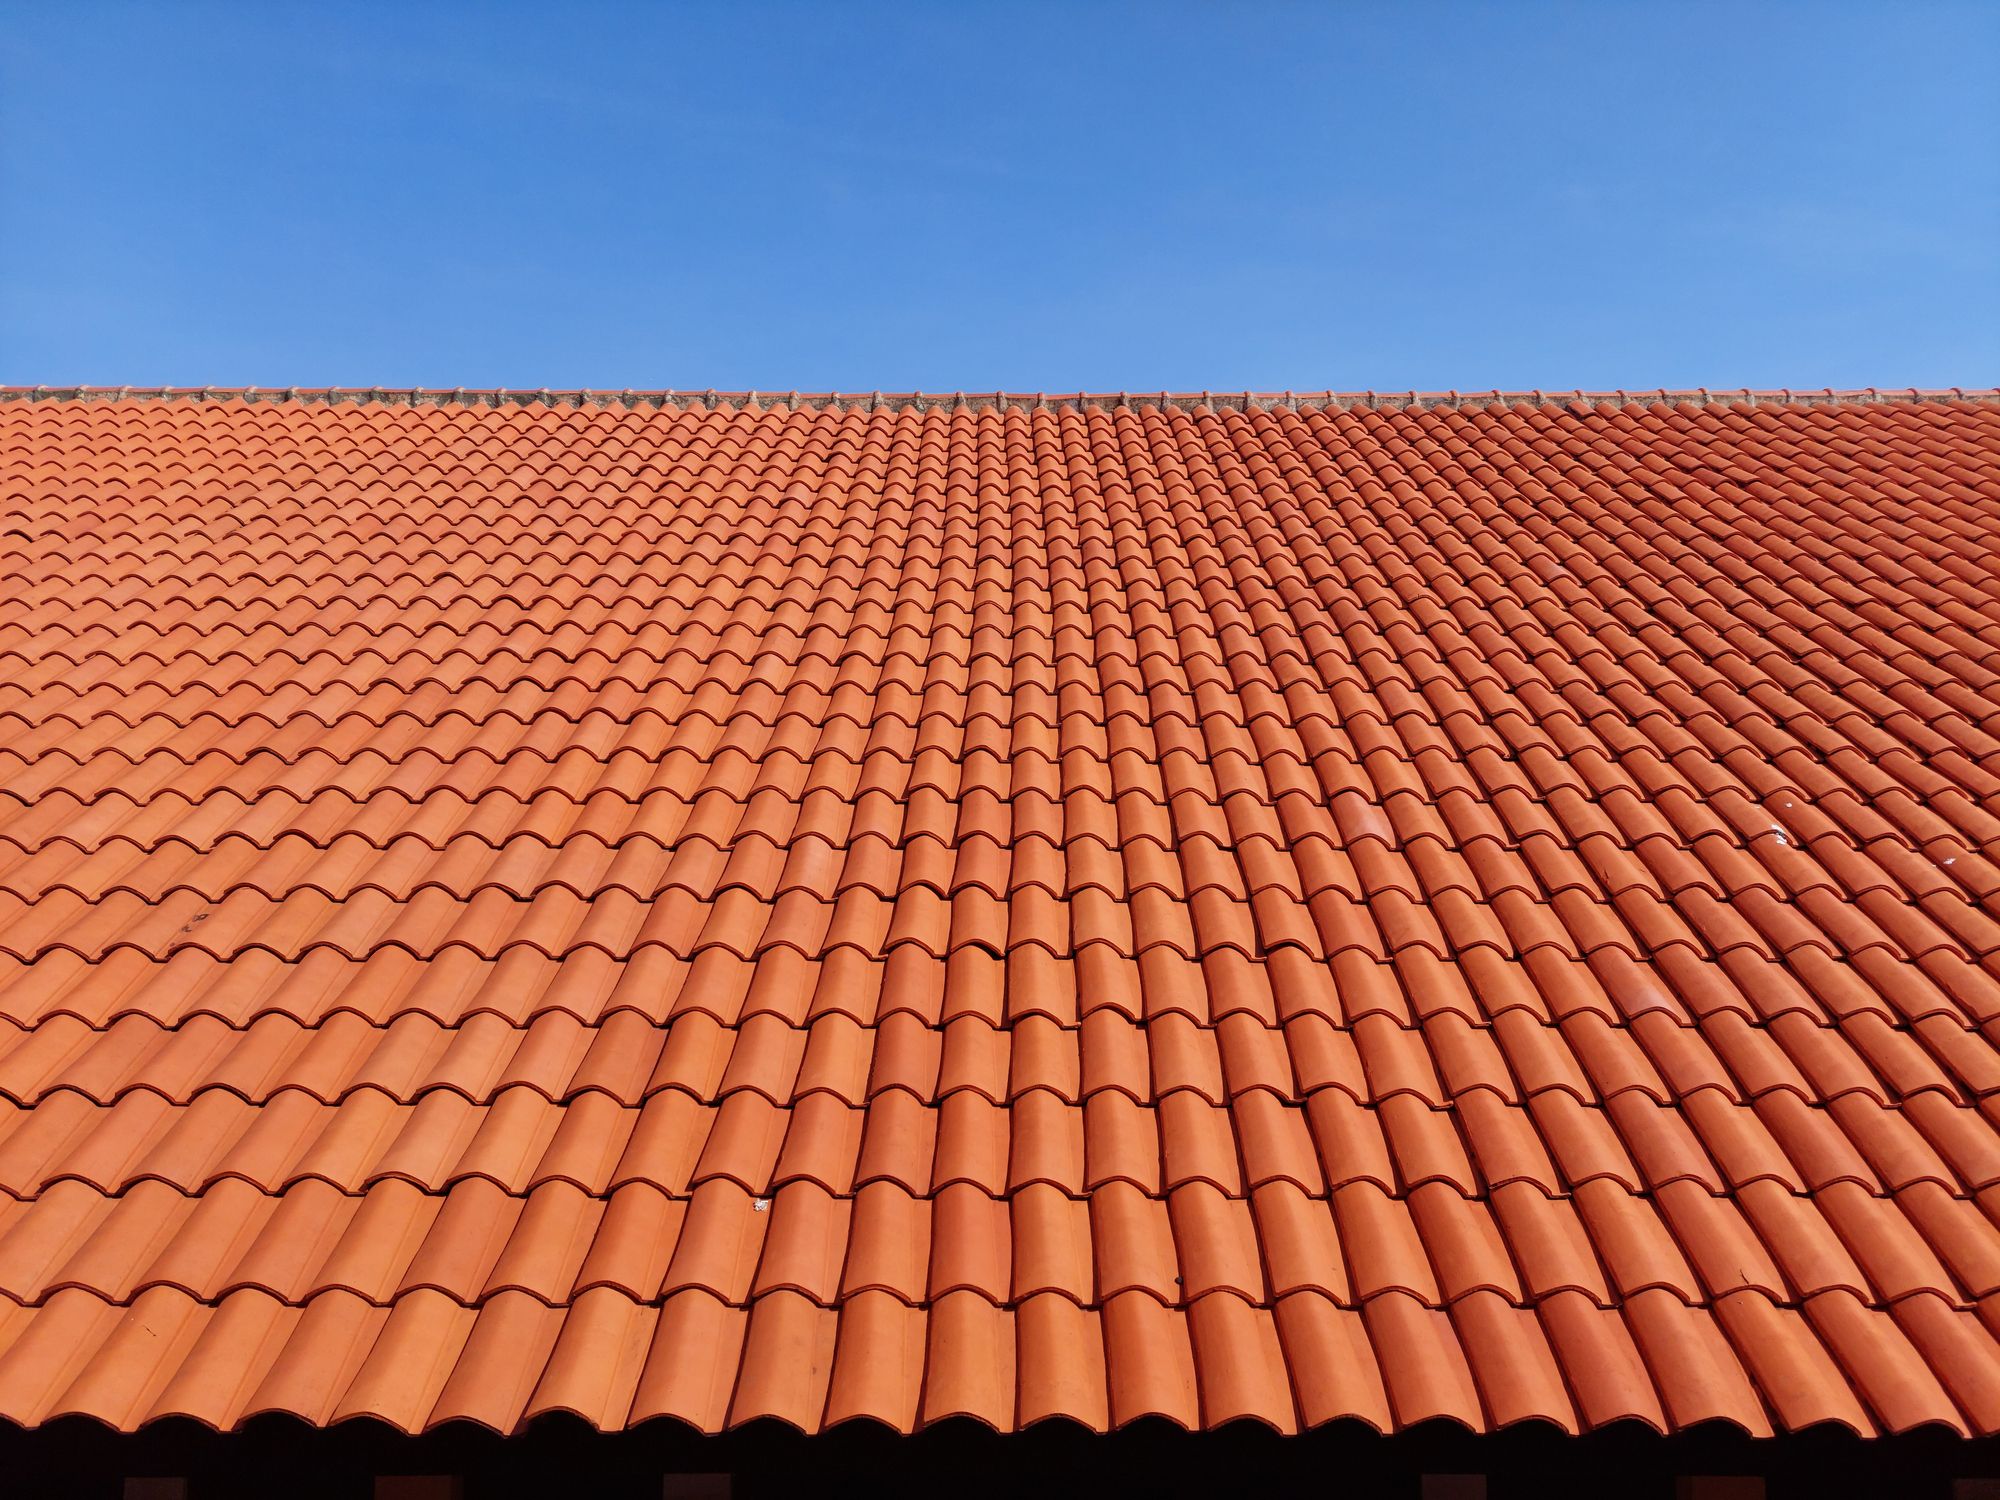 Shingle Roofing: Beauty, Durability, and Reliability